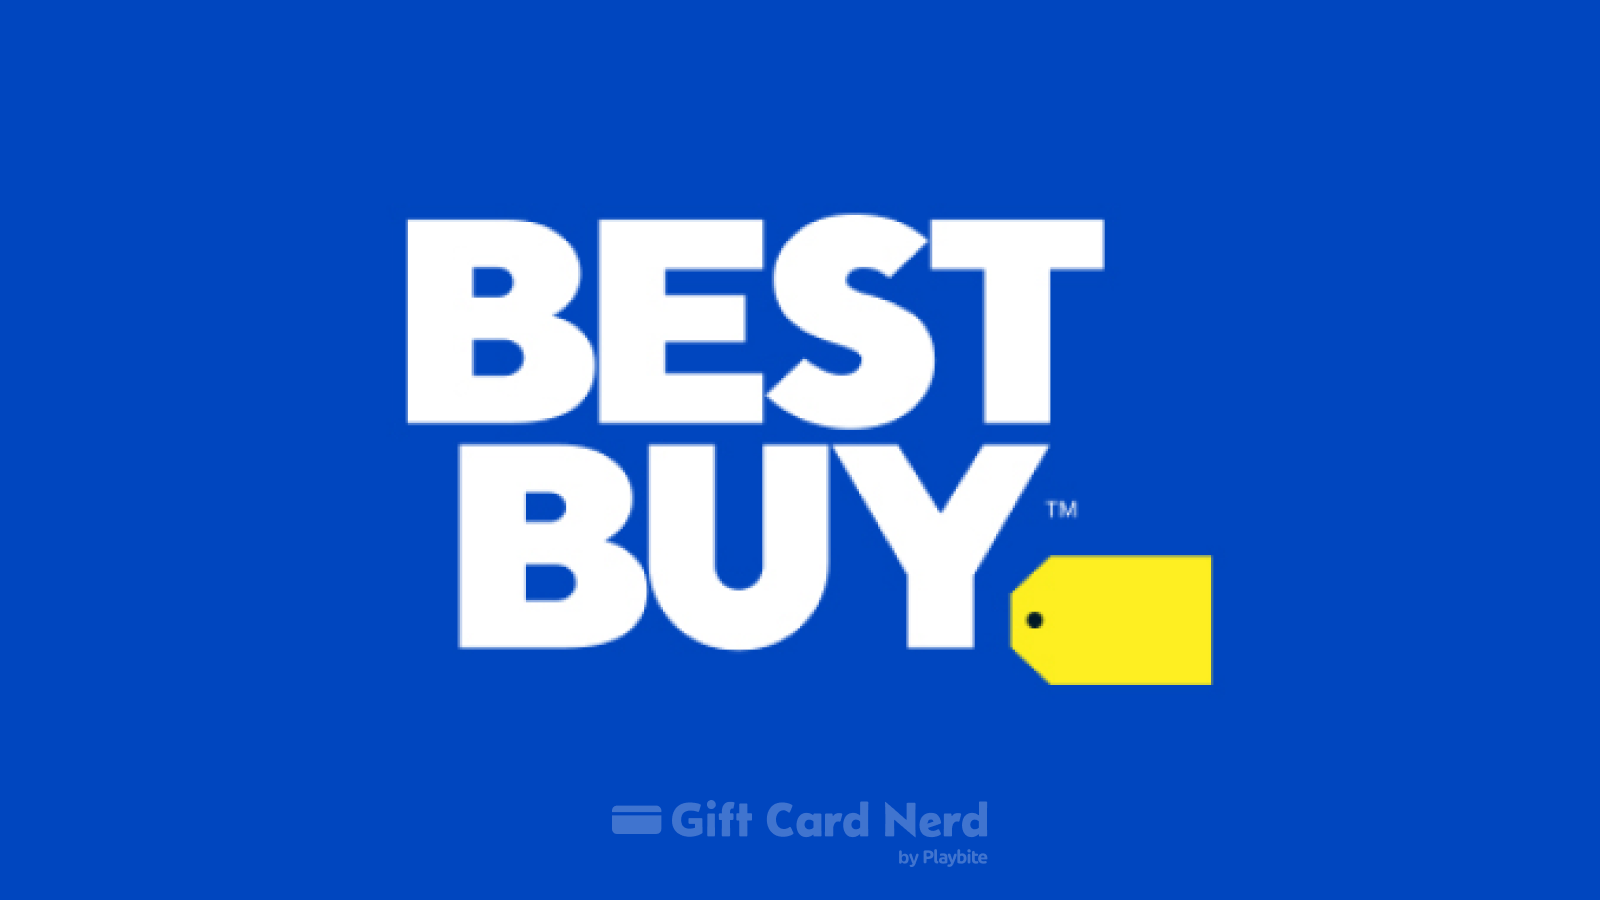 Can I Use a Best Buy Gift Card on Steam?